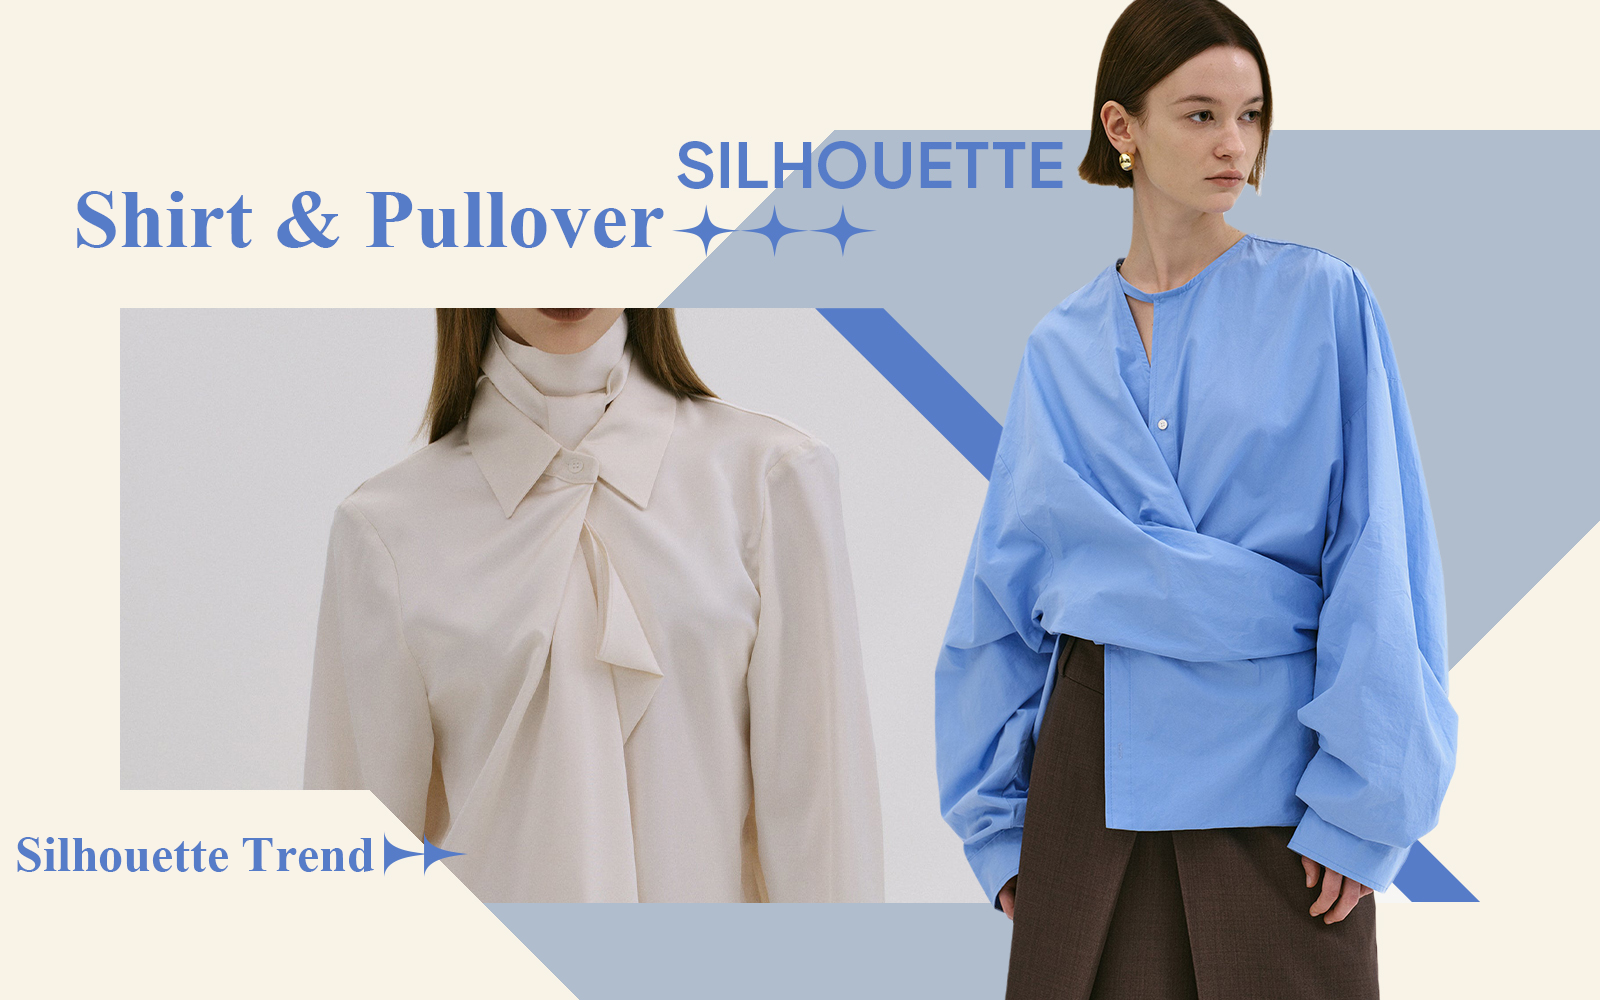 The Silhouette Trend for Women's Shirt & Pullover